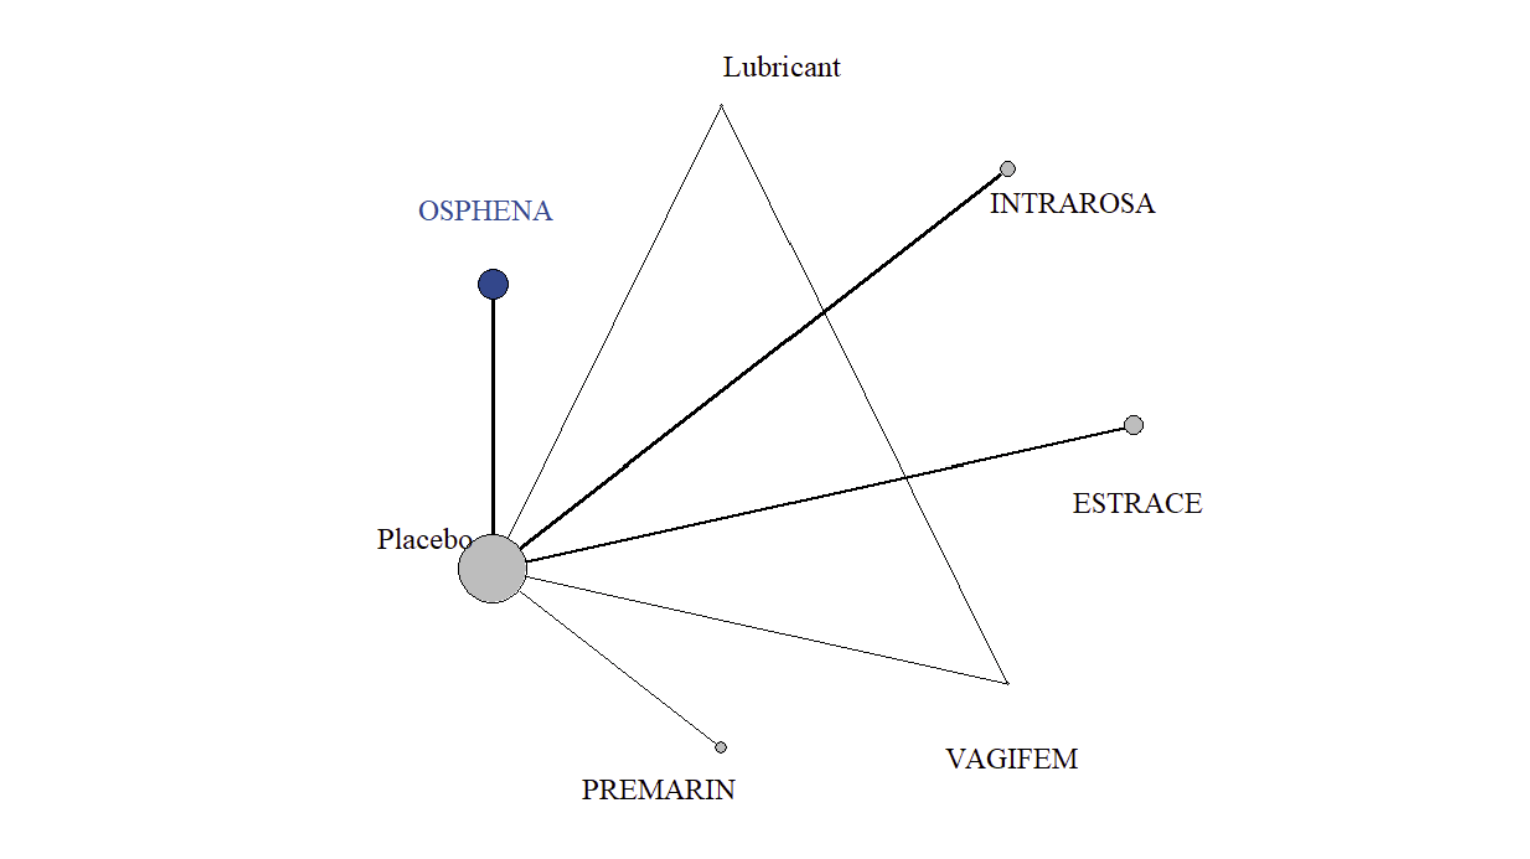 The evidence network for most bothersome symptom score reduction for vaginal dryness at 12 weeks is shown for the sponsor-submitted ITC. In the network, Osphena, lubricant, Intrarosa, Estrace, Vagifem, and Premarin are connected to each other indirectly through the placebo node. Lubricant and Vagifem are connected directly.